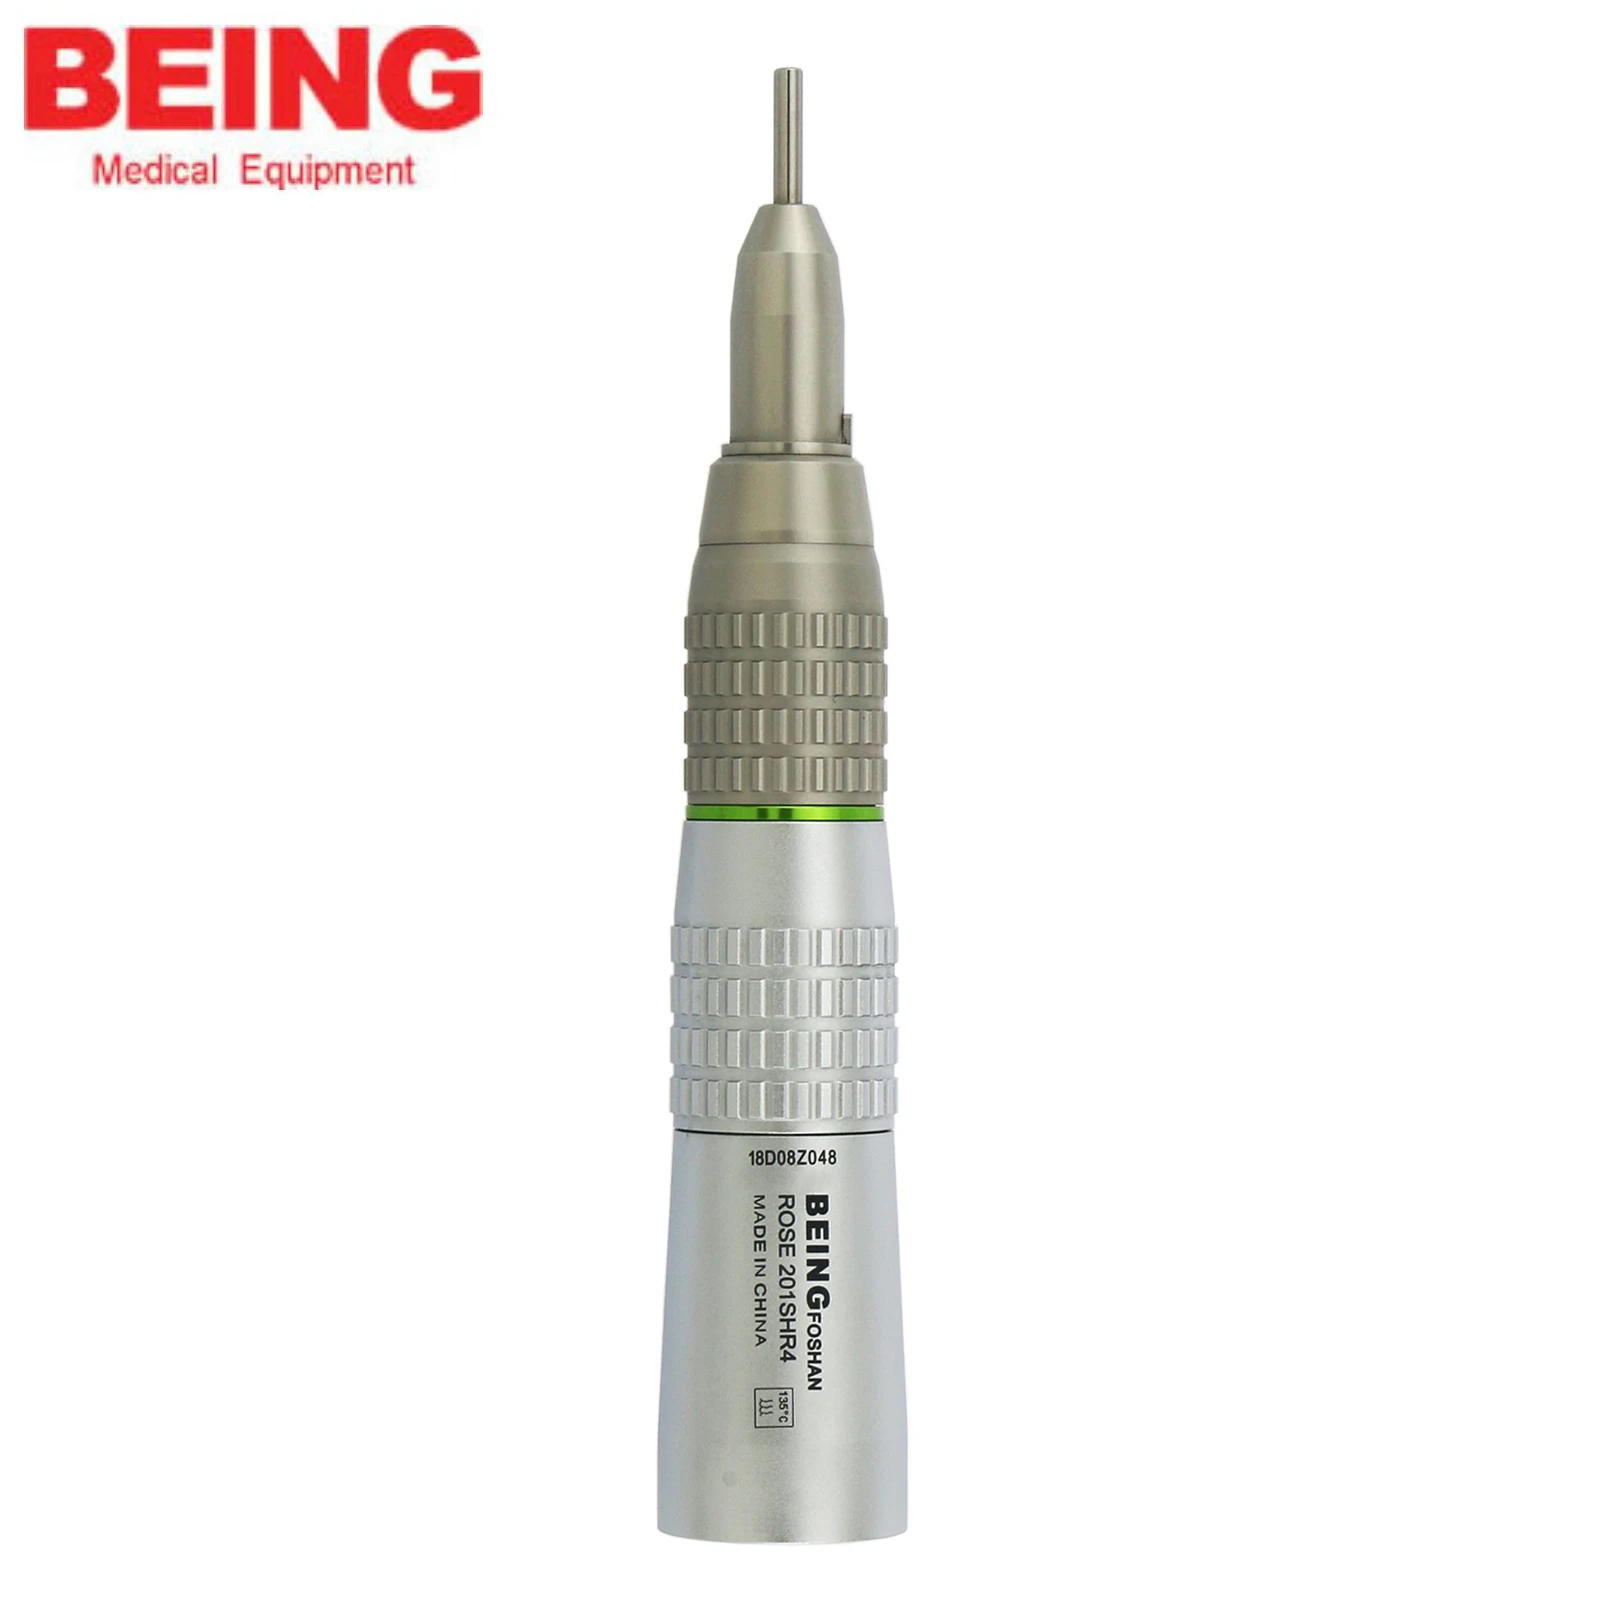 BEING Dental 4:1 Reduction Low Speed Straight Handpiece Nose Cone Rose 201SH-R4 Fit ISO E Type NSK KAVO Air Motor